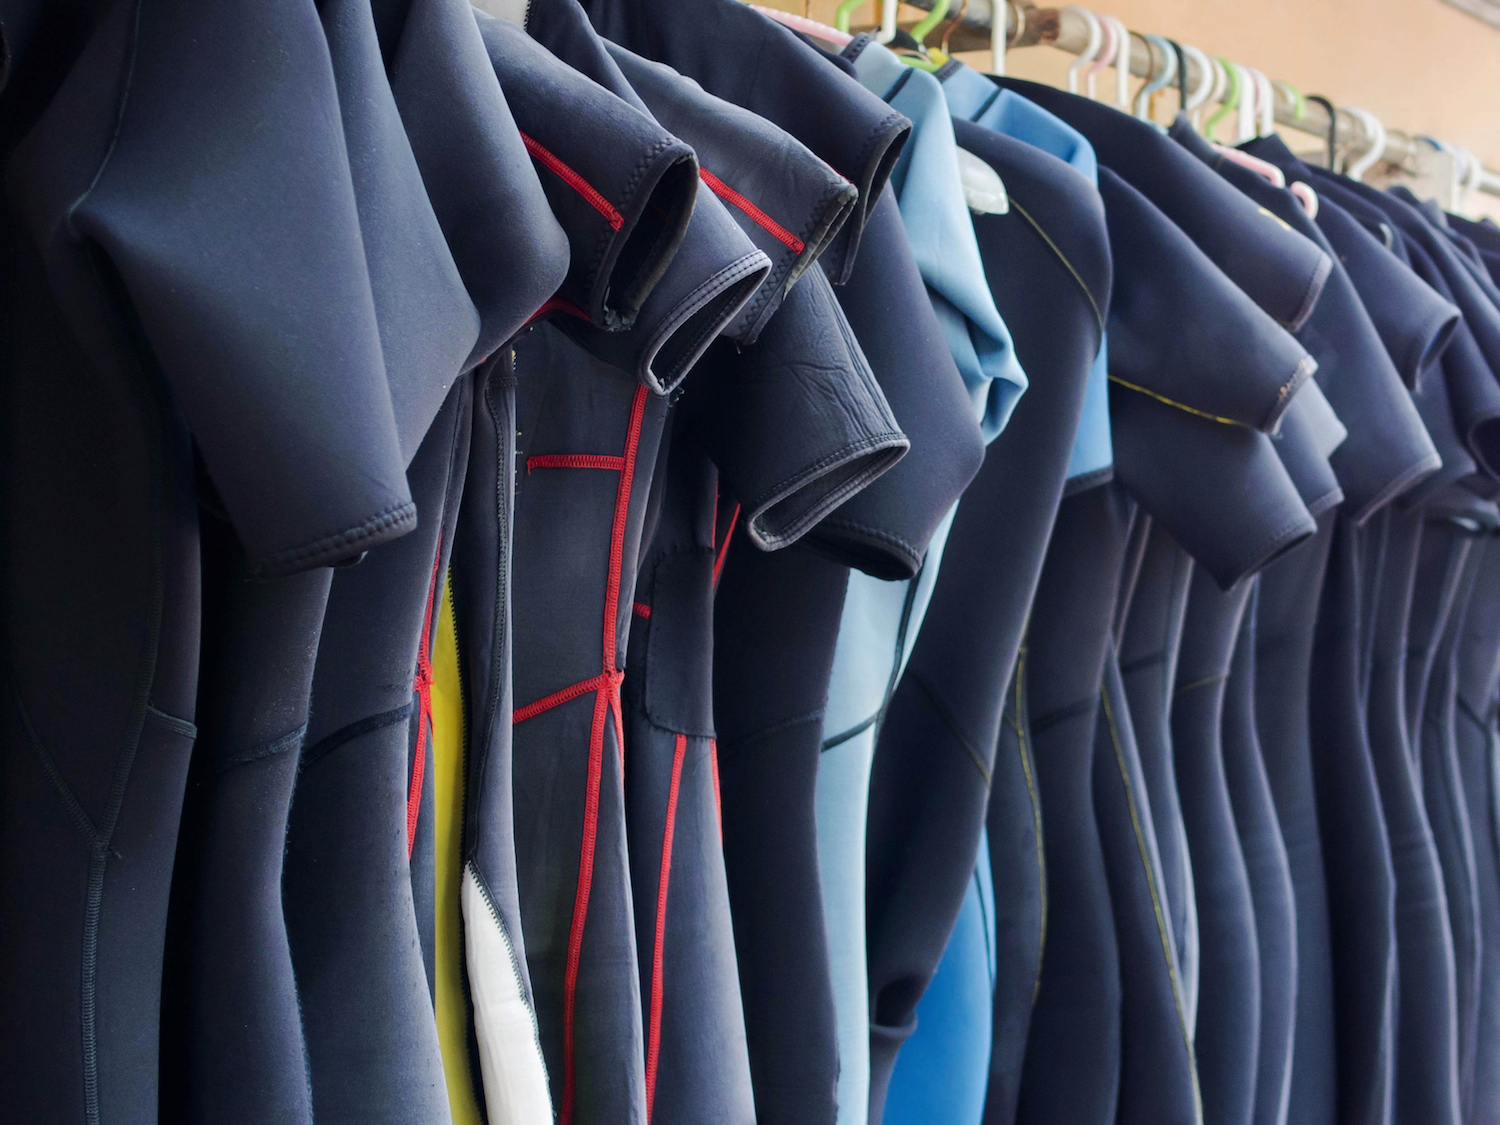 Wetsuits on a rail, which don't need as much maintenance as drysuits, which is a difference between a wetsuit and a drysuit